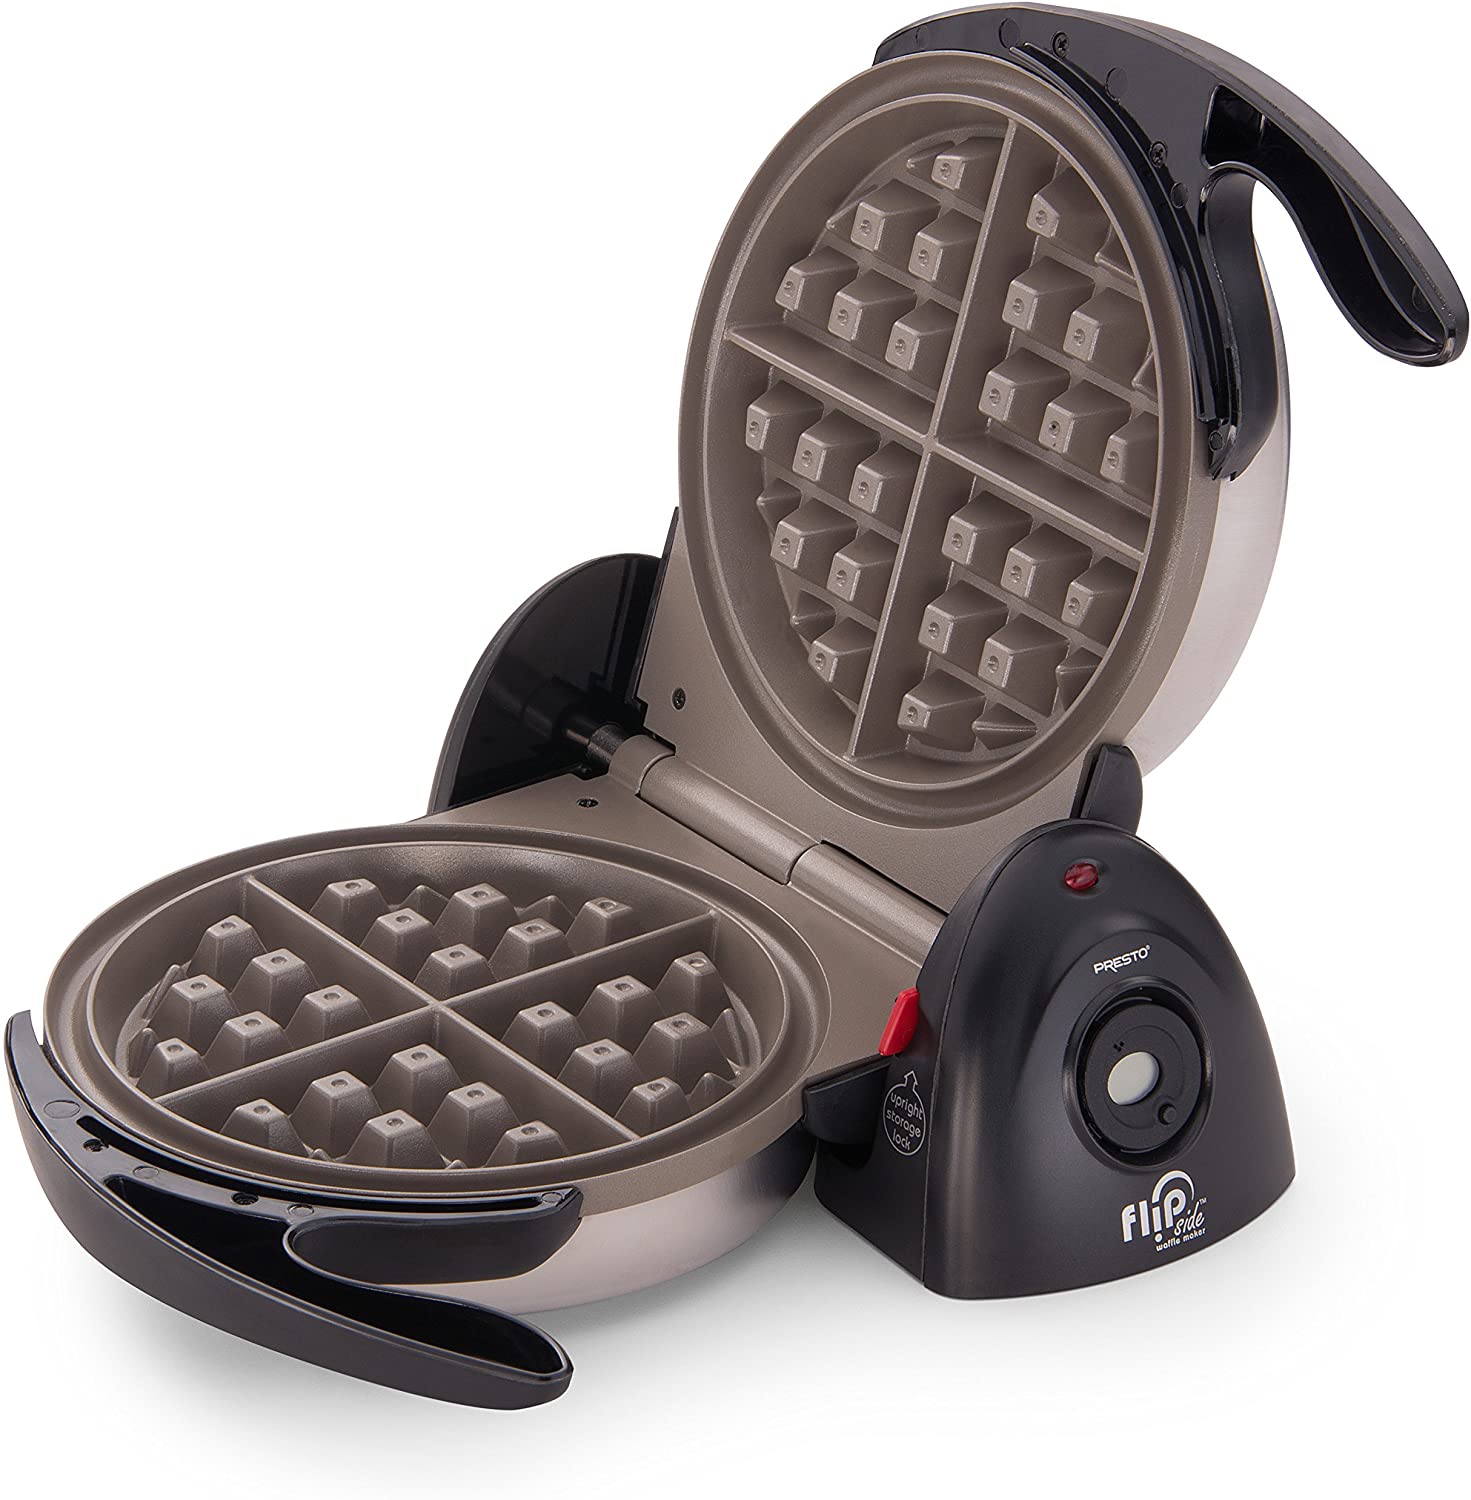 Presto 03510 Stainless Steel Extra-Thick Waffle Maker